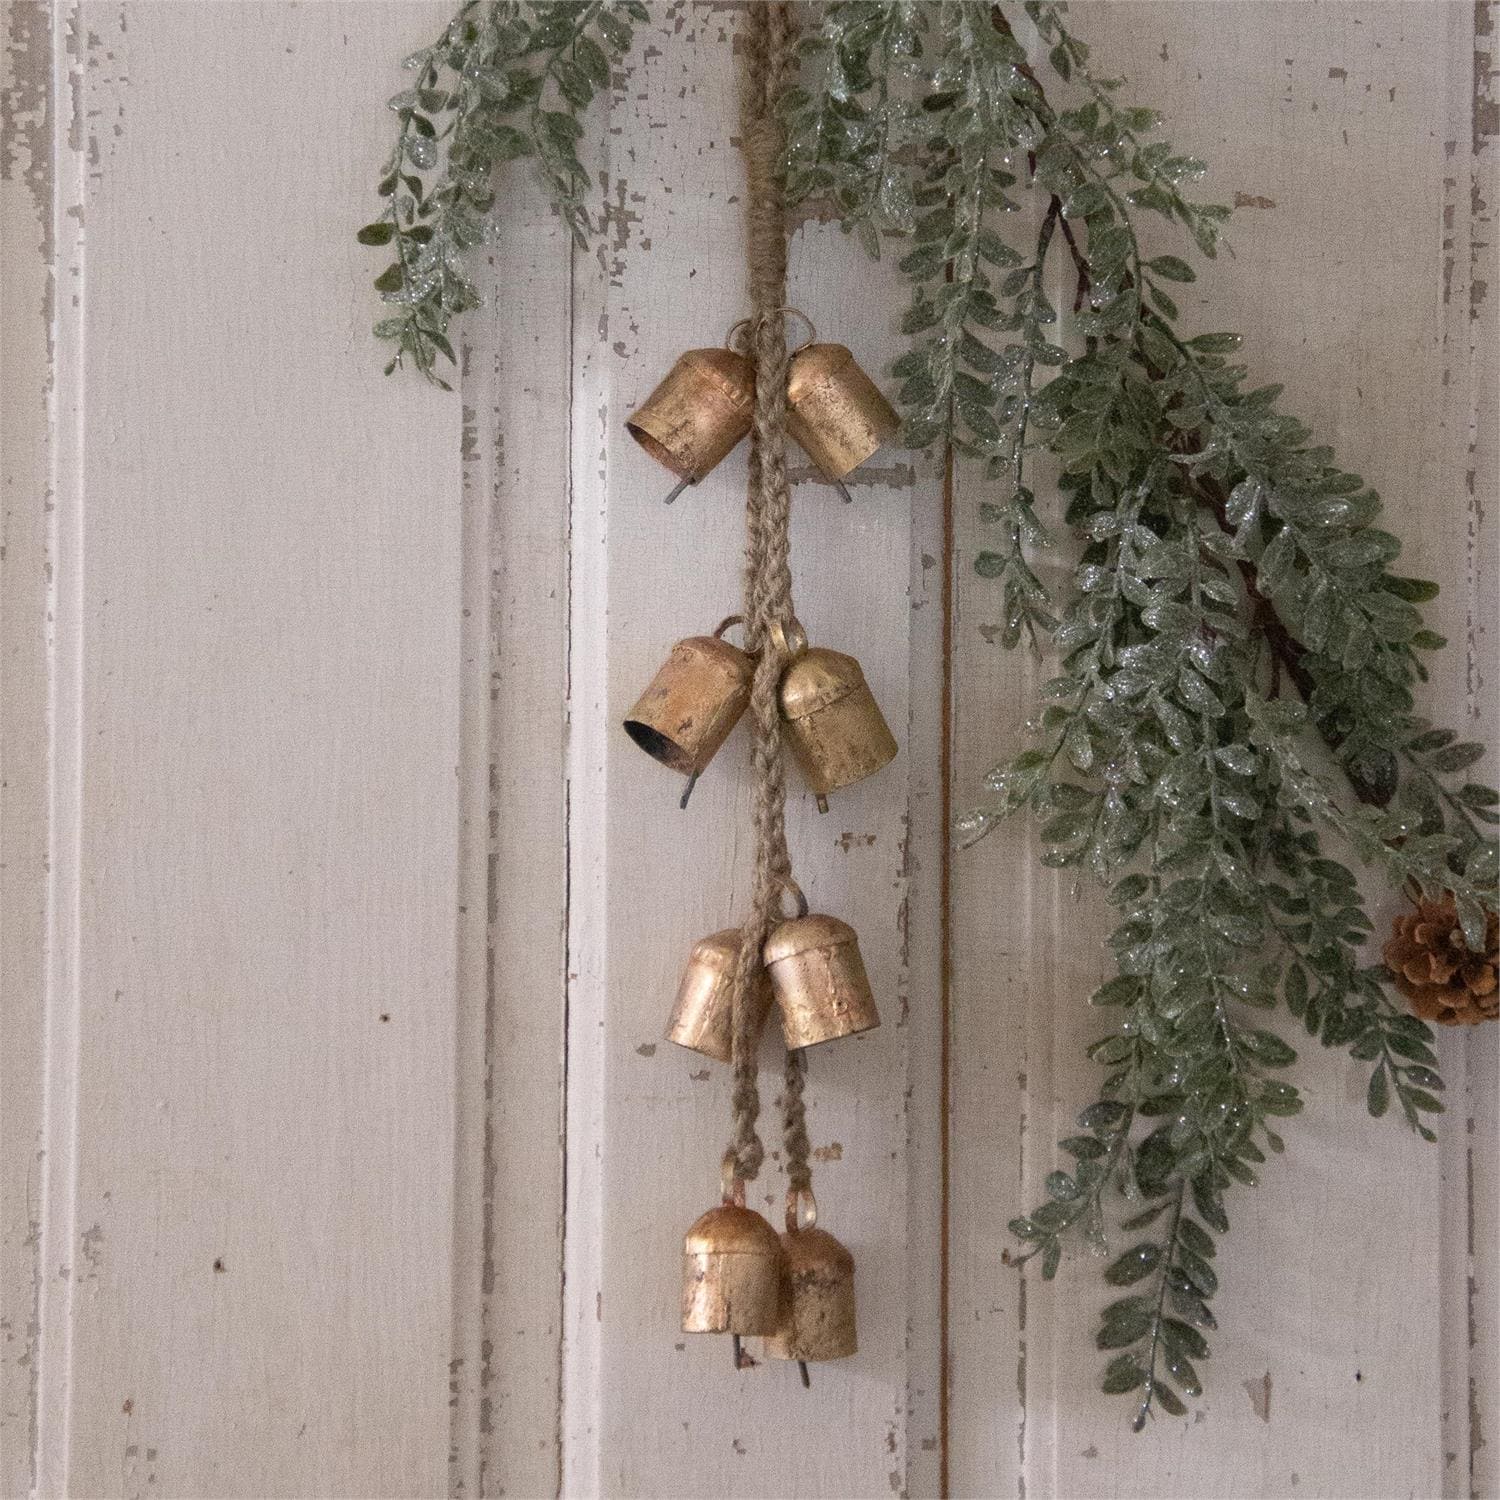 Four Small Brass Bell Hang On Stock Photo 1206522796